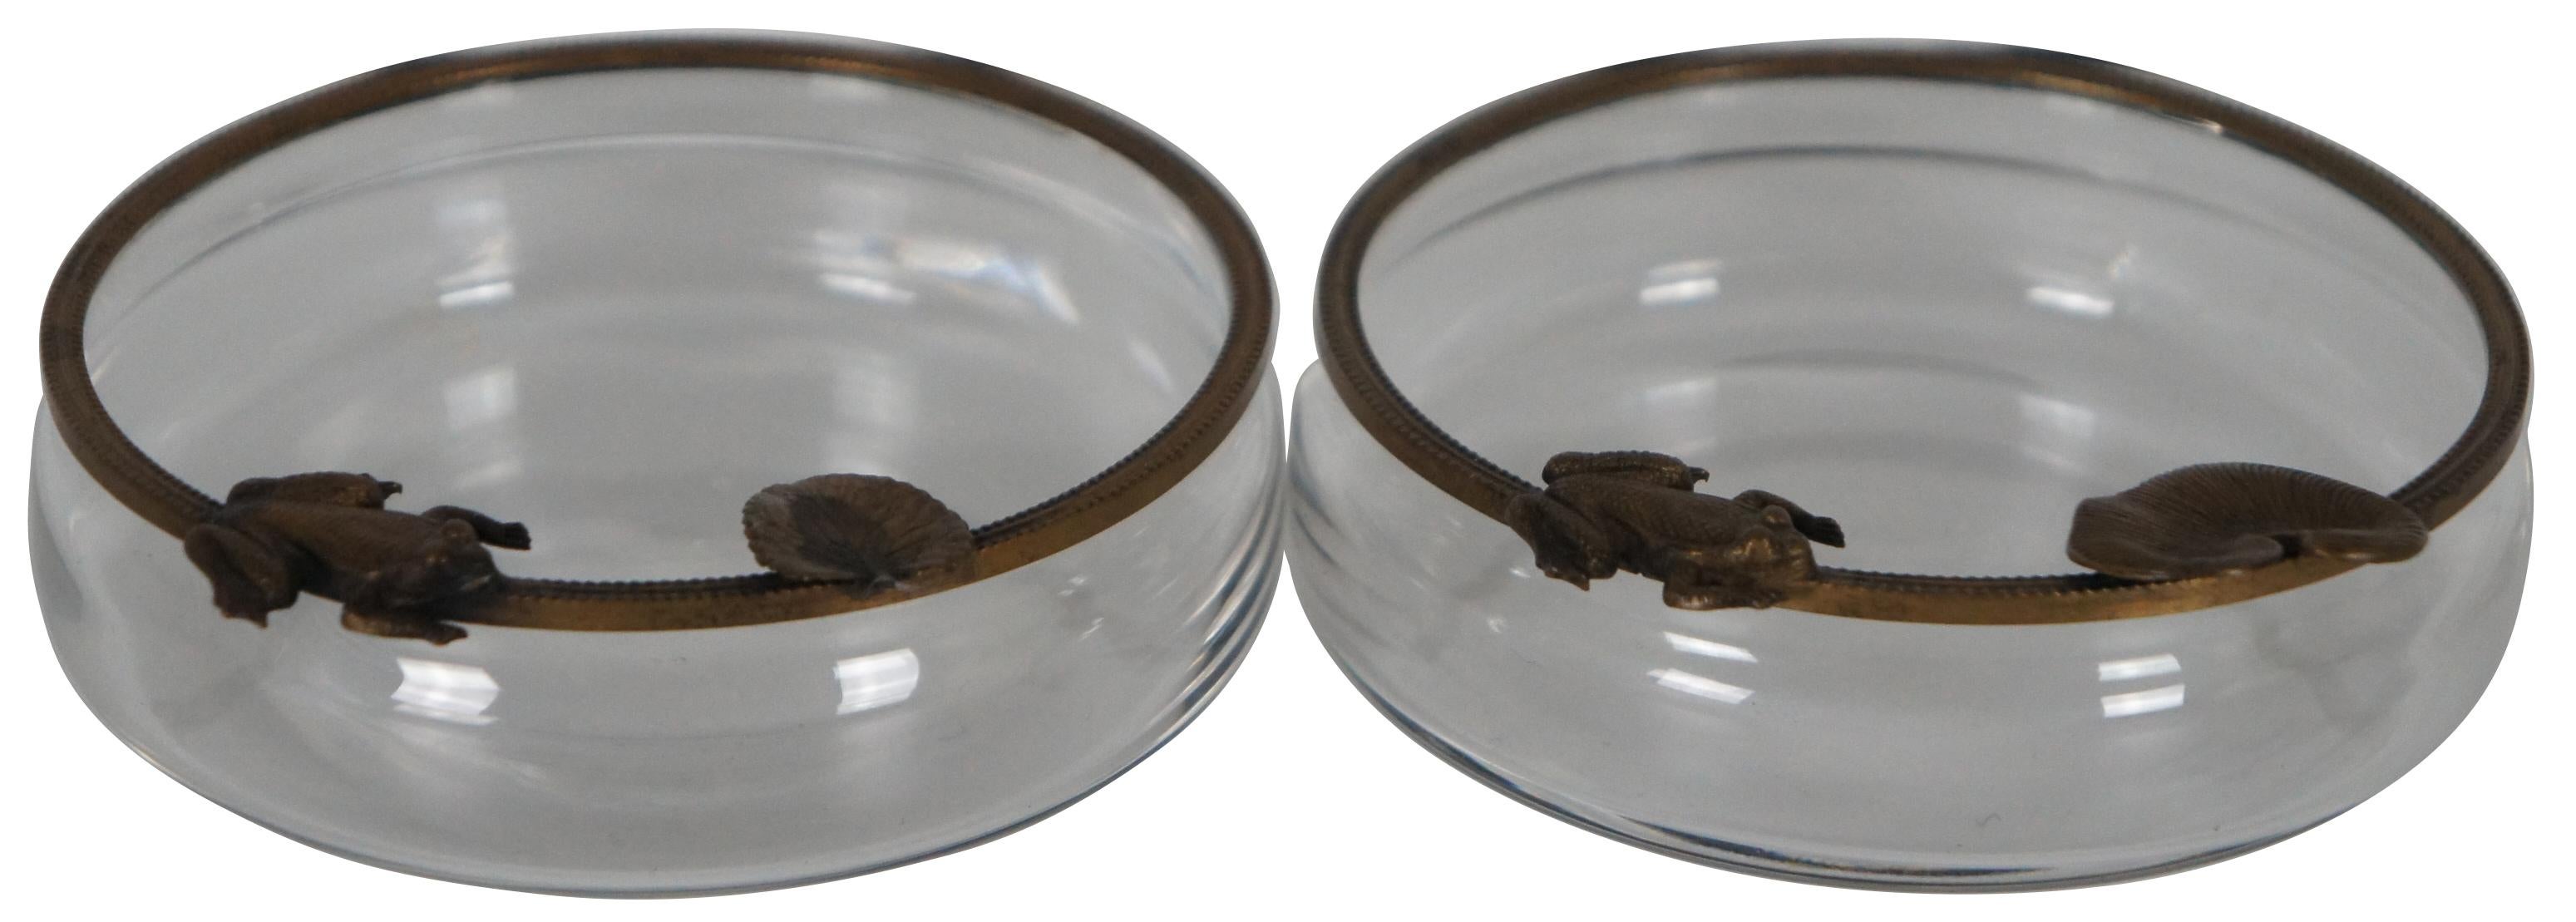 Pair of vintage glass candy or nut dishes with brass edges decorated with frogs and lily pads. Measure: 4